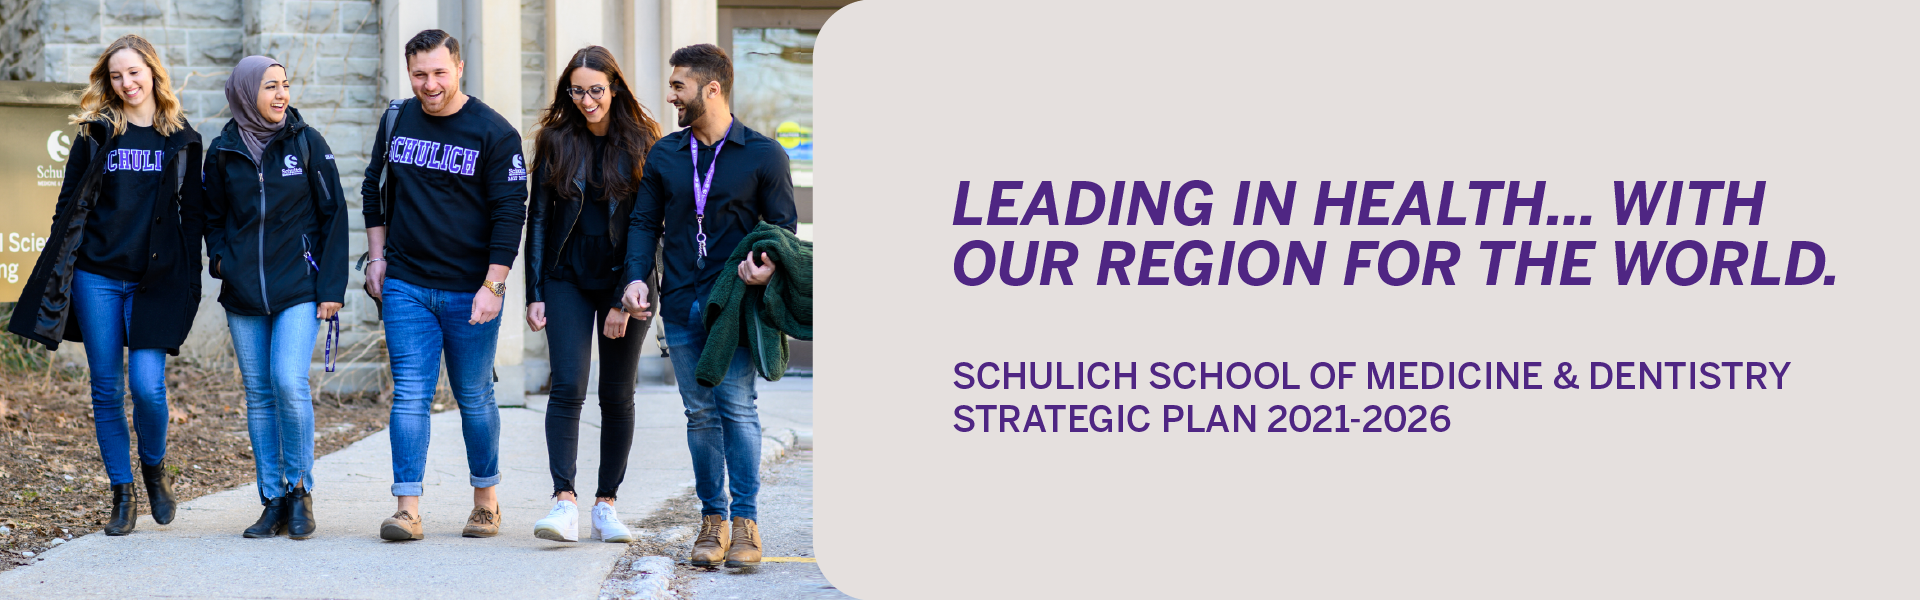 Schulich Medicine & Dentistry embraces the future with a bold, new five-year Strategic Plan